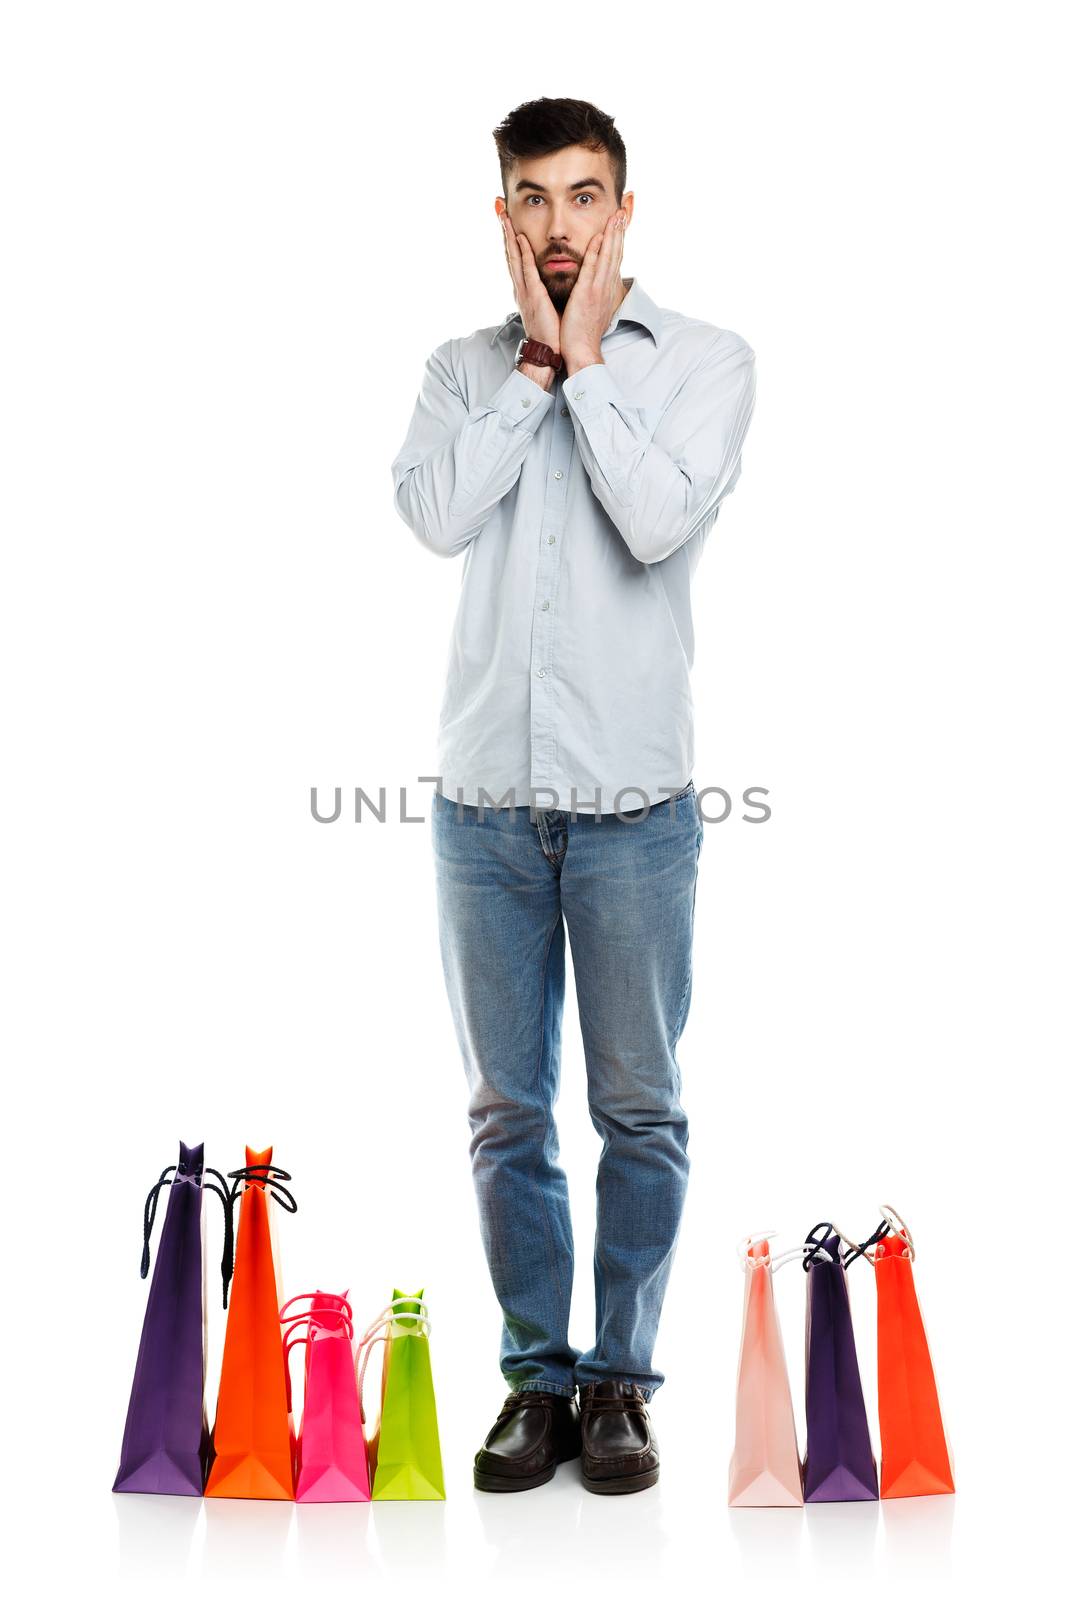 Handsome man with shopping bags is shocked by vlad_star